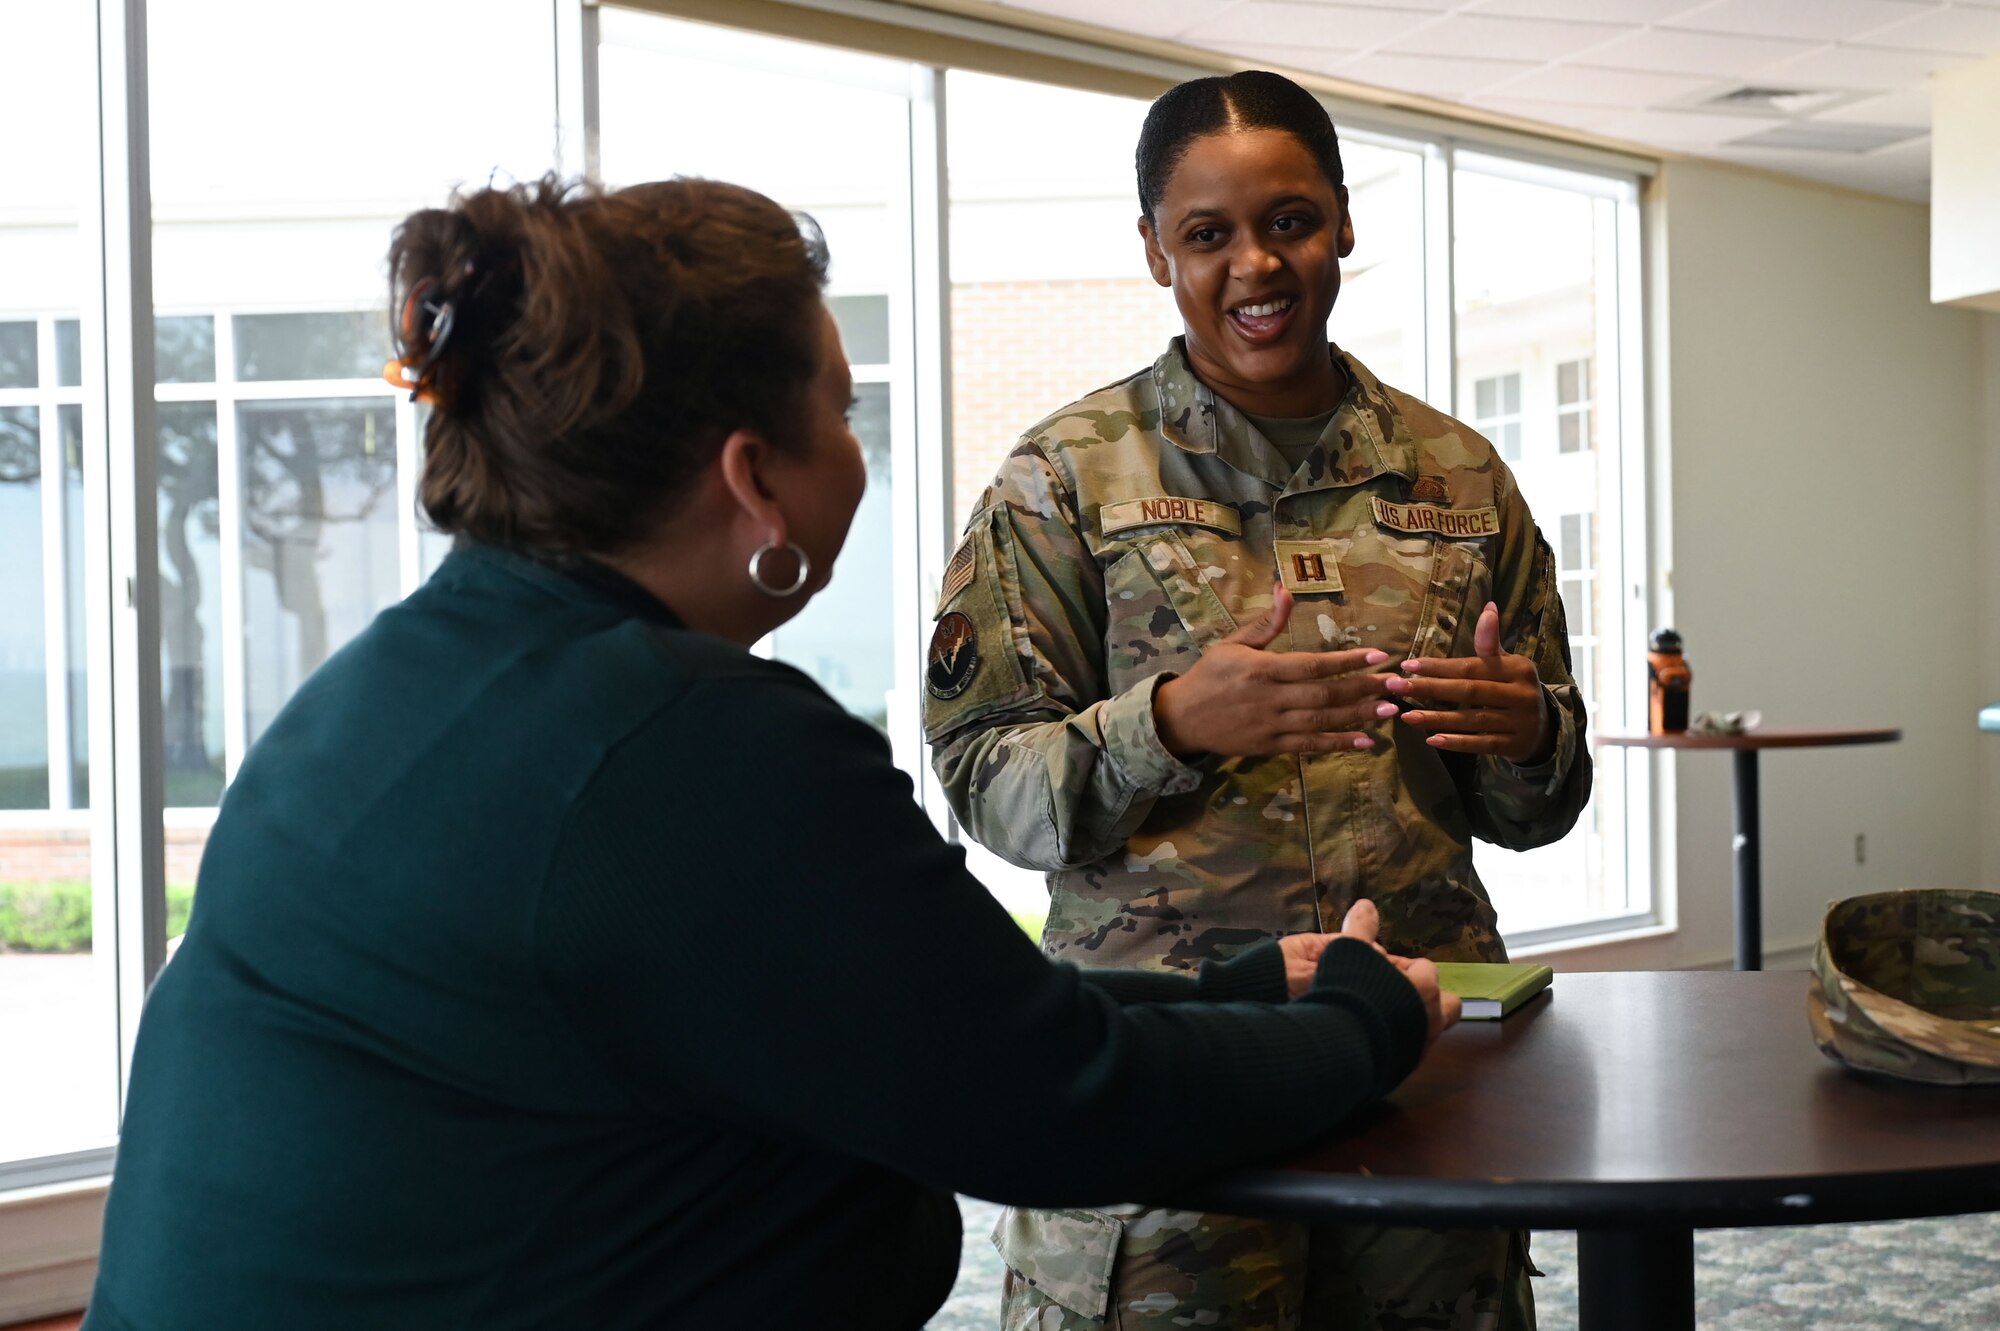 U.S. Air Force Captain Nemia Noble, 16th Electronic Warfare B-1 assistant flight commander, talks to Michelle Kerlin, 350th Spectrum Warfare Wing deputy director of staff, during the first 350th SWW Women’s history Month Symposium at Eglin Air Force Base, Fla., March 27, 2023. Female members from the wing had a chance to discuss their experiences as women while serving in the military. (U.S. Air Force photo by Staff Sgt. Ericka A. Woolever)